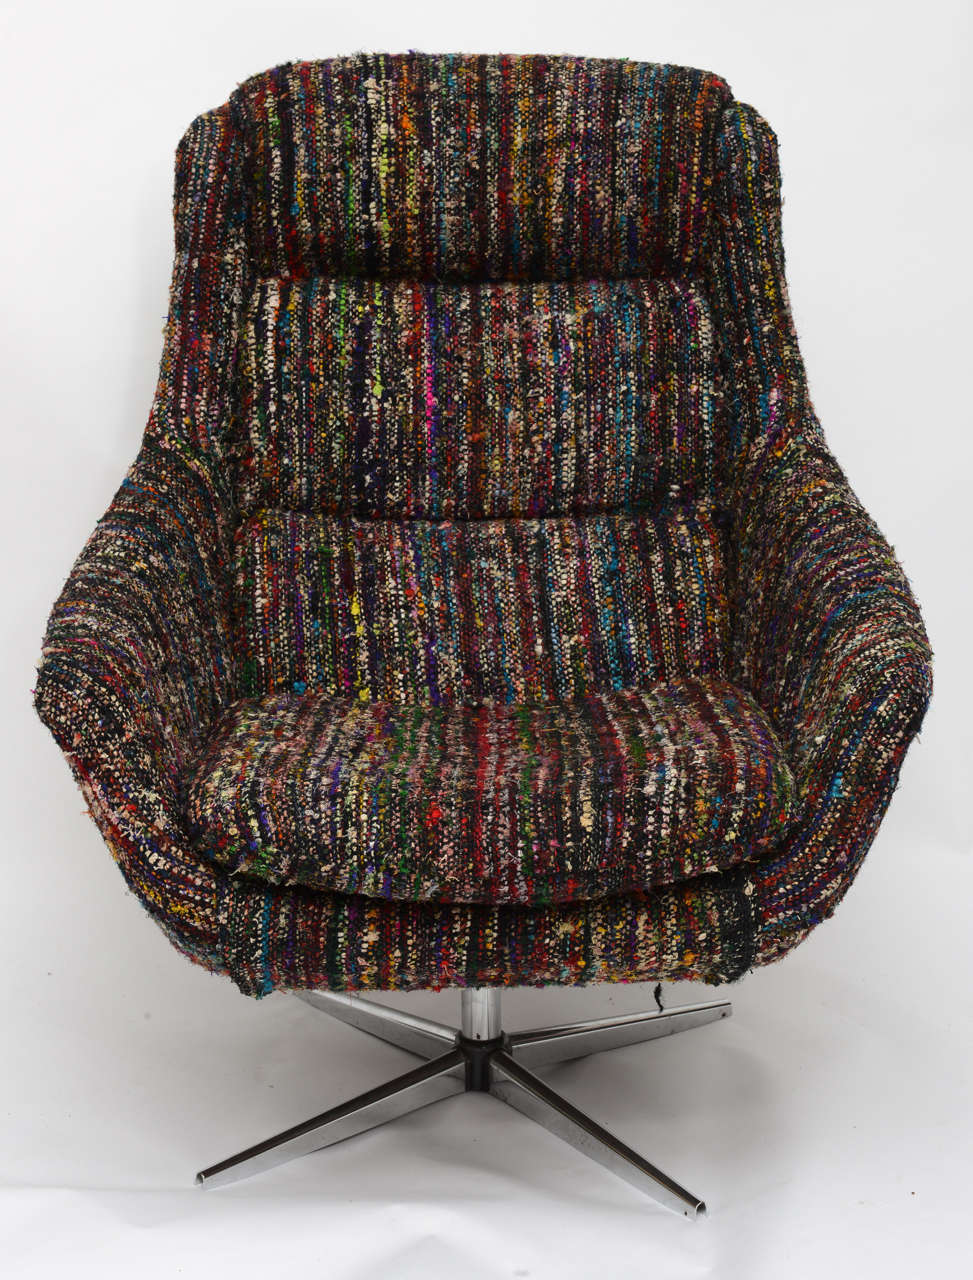 Gorgeous restored vintage MCM chair reupholstered in reminant vintage Chanel fabric. Chair and fabric from the 60s.